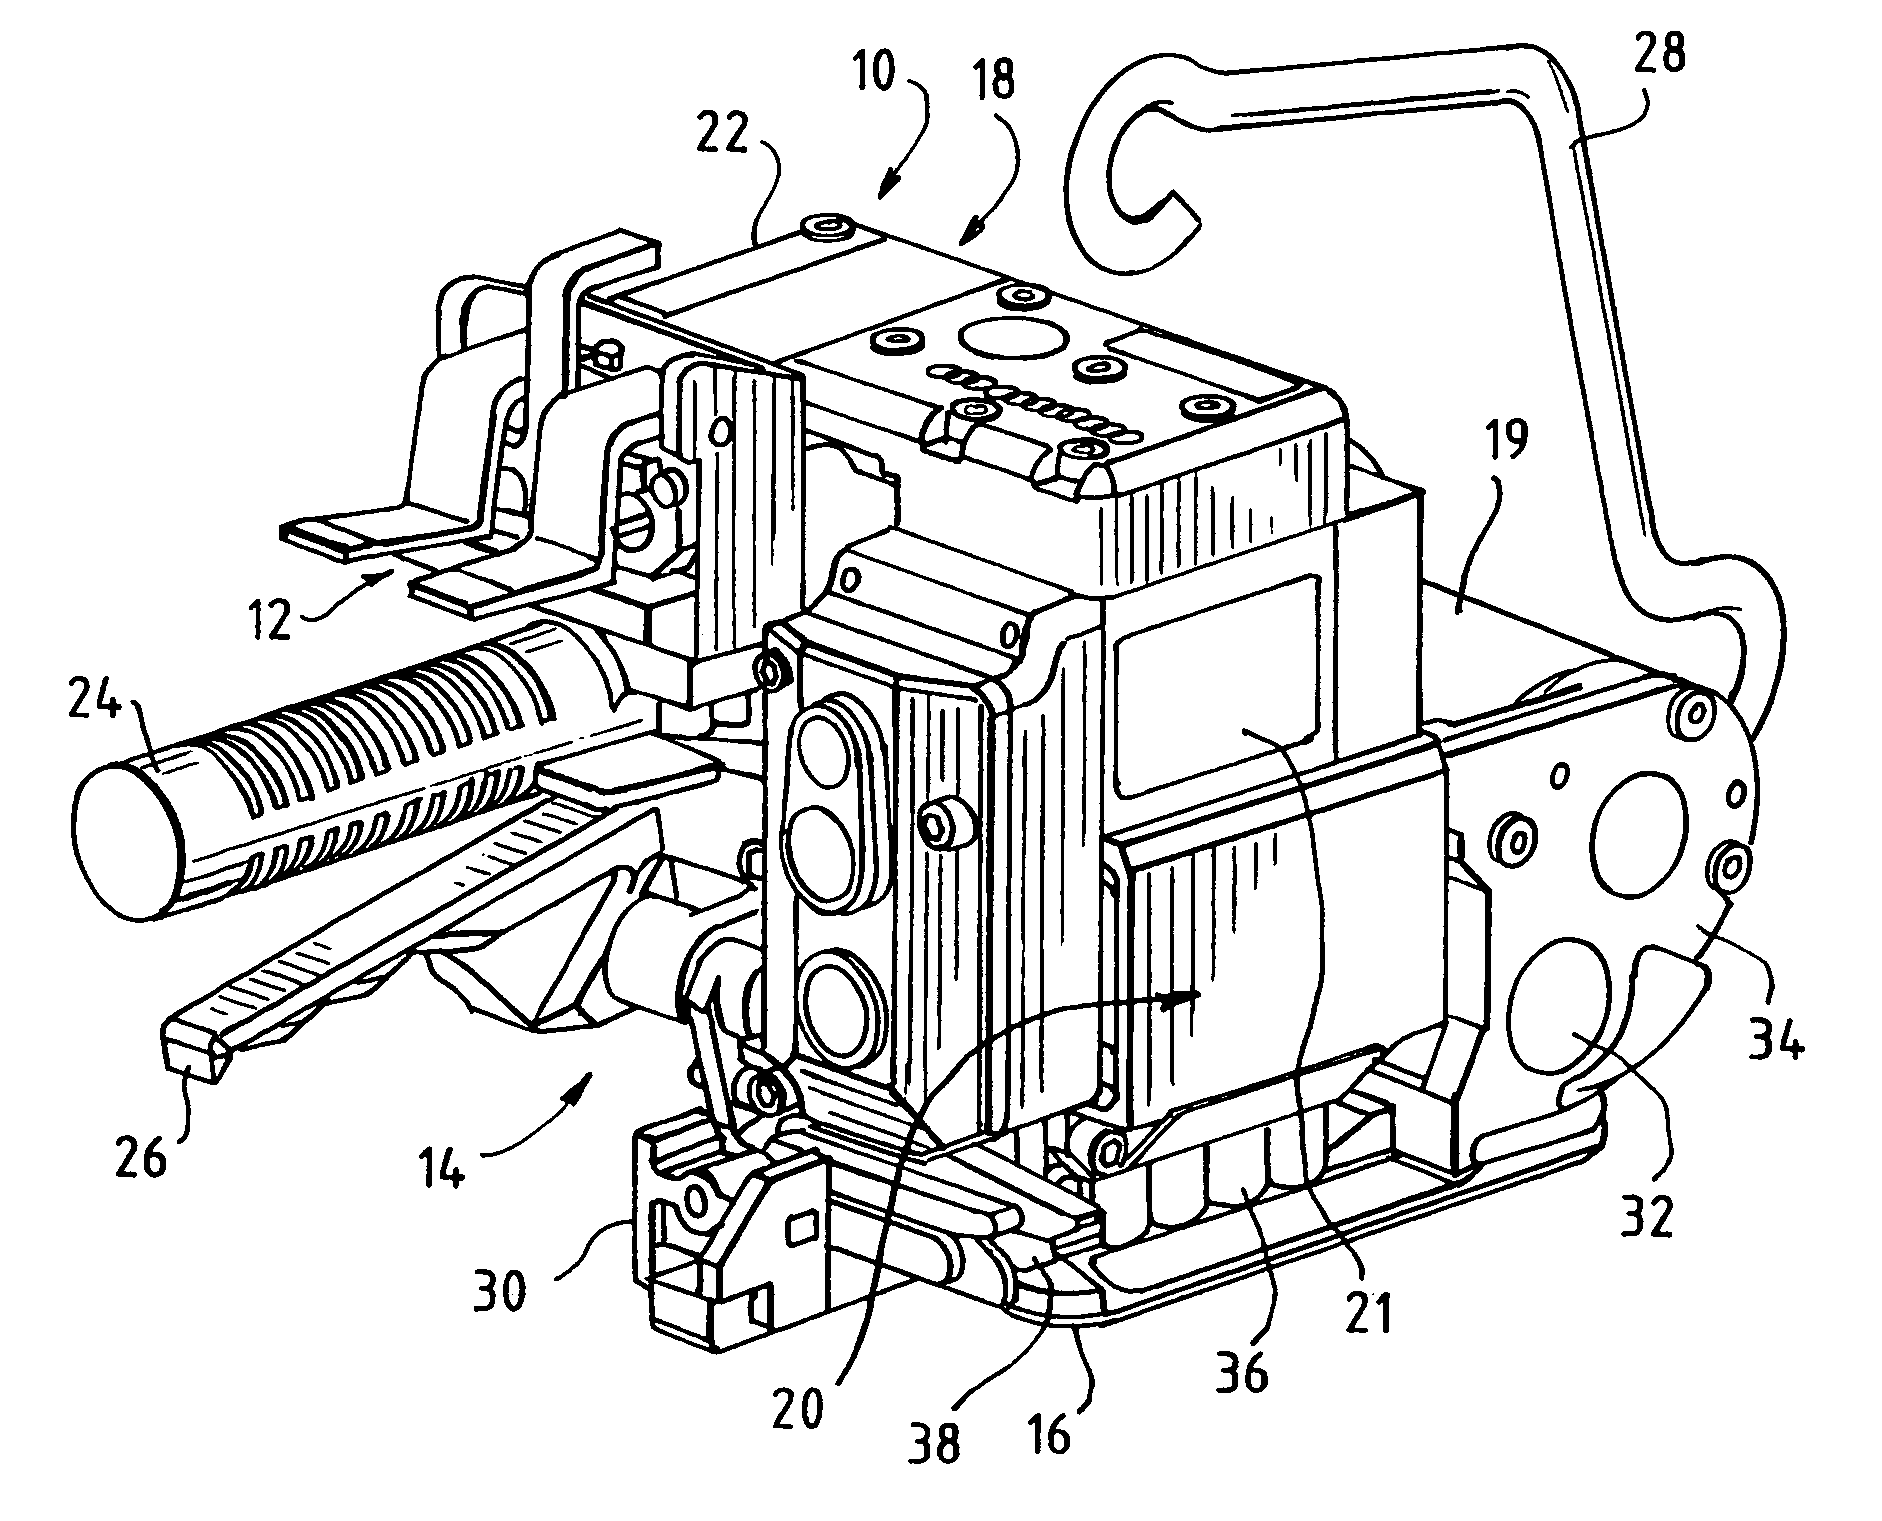 Lock-out for power assisted strapping tool